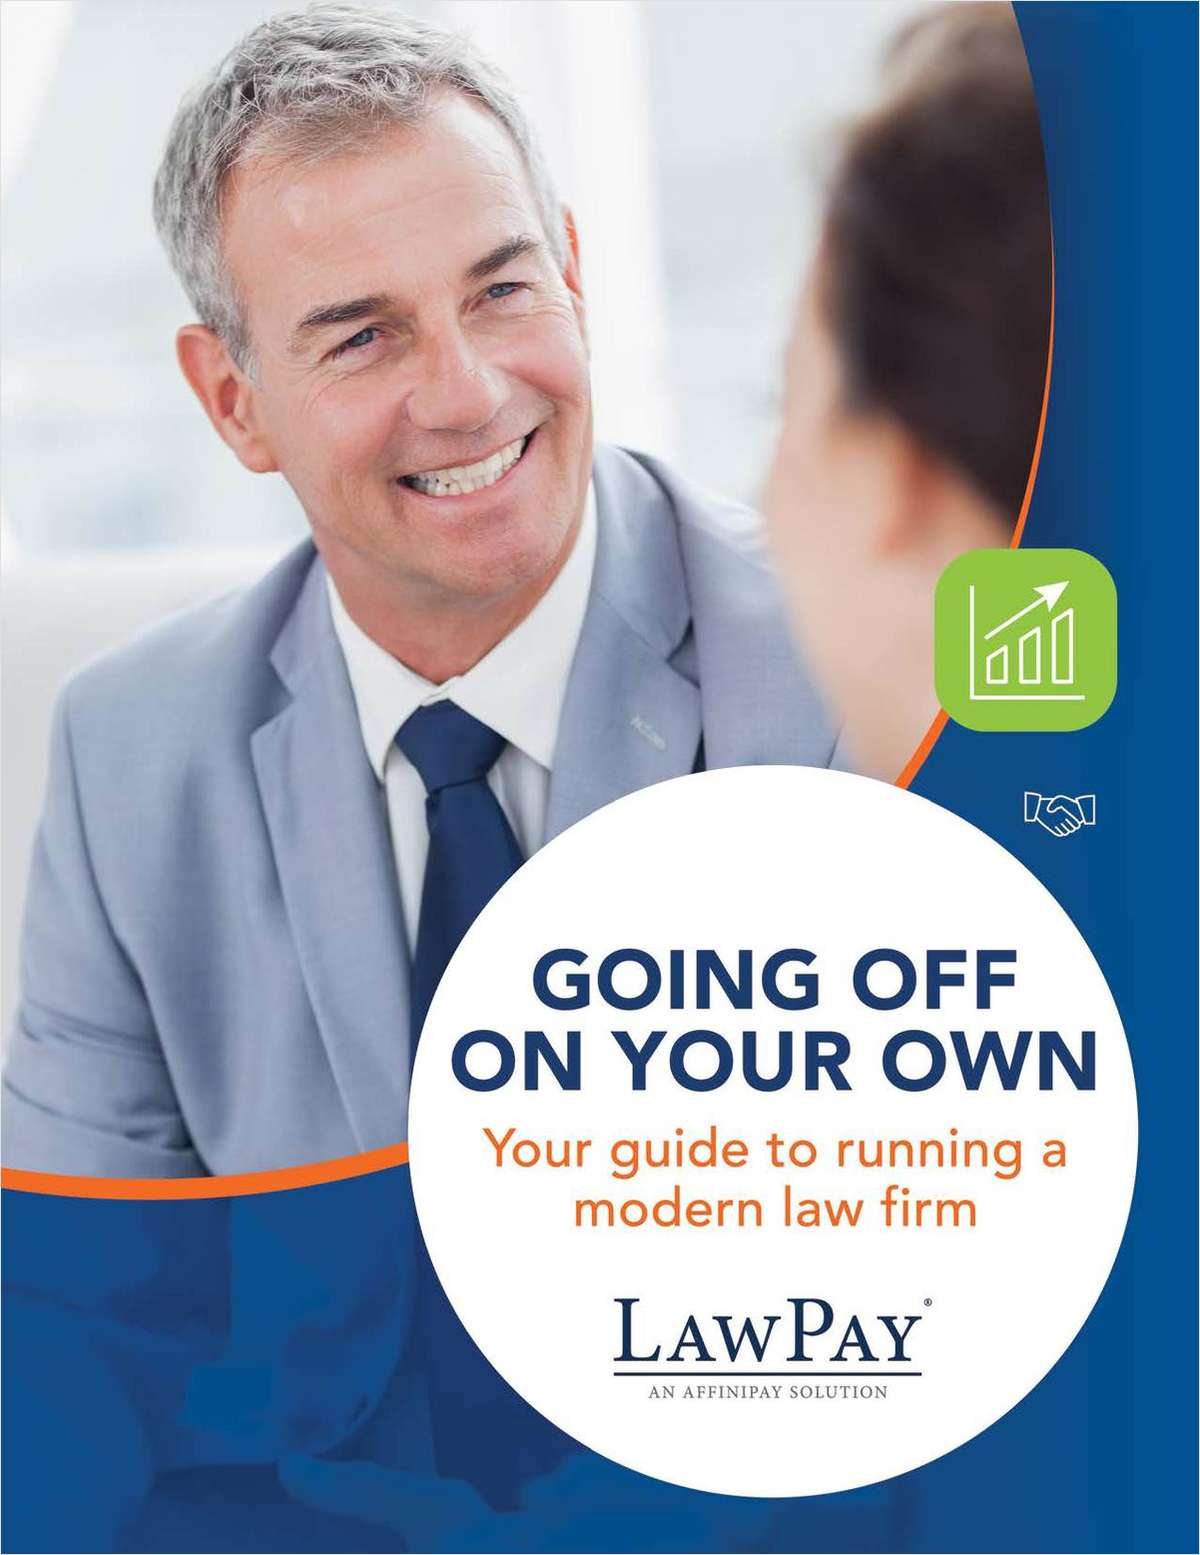 Launching a law firm is a serious undertaking and without a solid game plan, many legal entrepreneurs find they struggle far more than they have to. Fortunately, as long as you follow the steps outlined in this eBook, you’ll be well equipped to start strong and plant the seeds for a fruitful career in law.